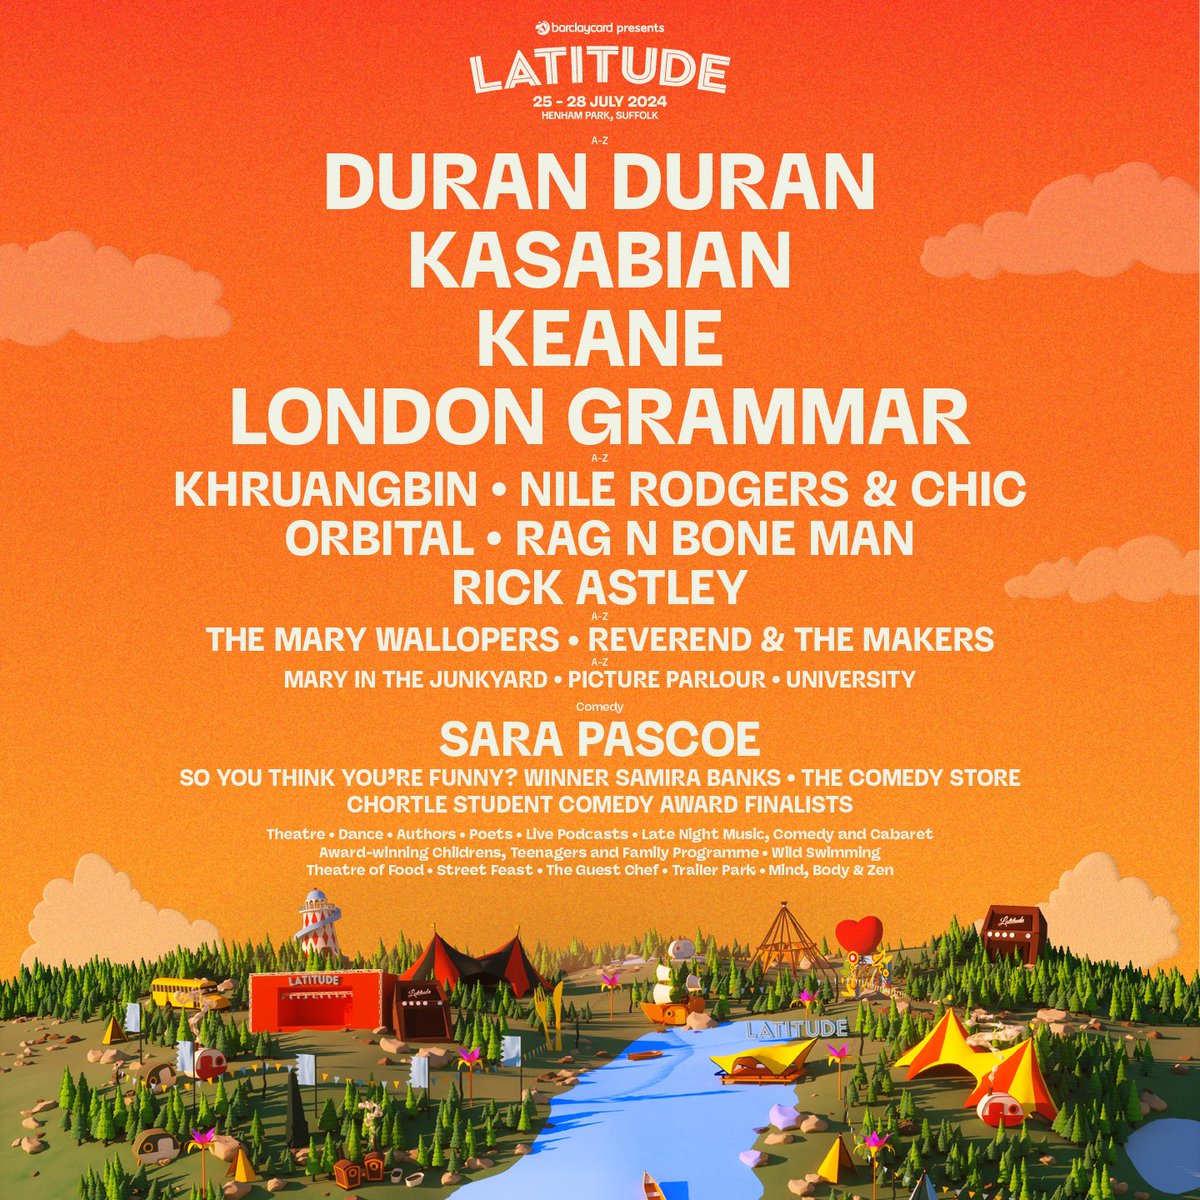 We're so excited to be playing @Barclaycard presents @LatitudeFest next summer! Tickets are on sale this Tuesday. See you there! #BarclaycardxLatitude TICKETS - latitudefestival.com/tickets/